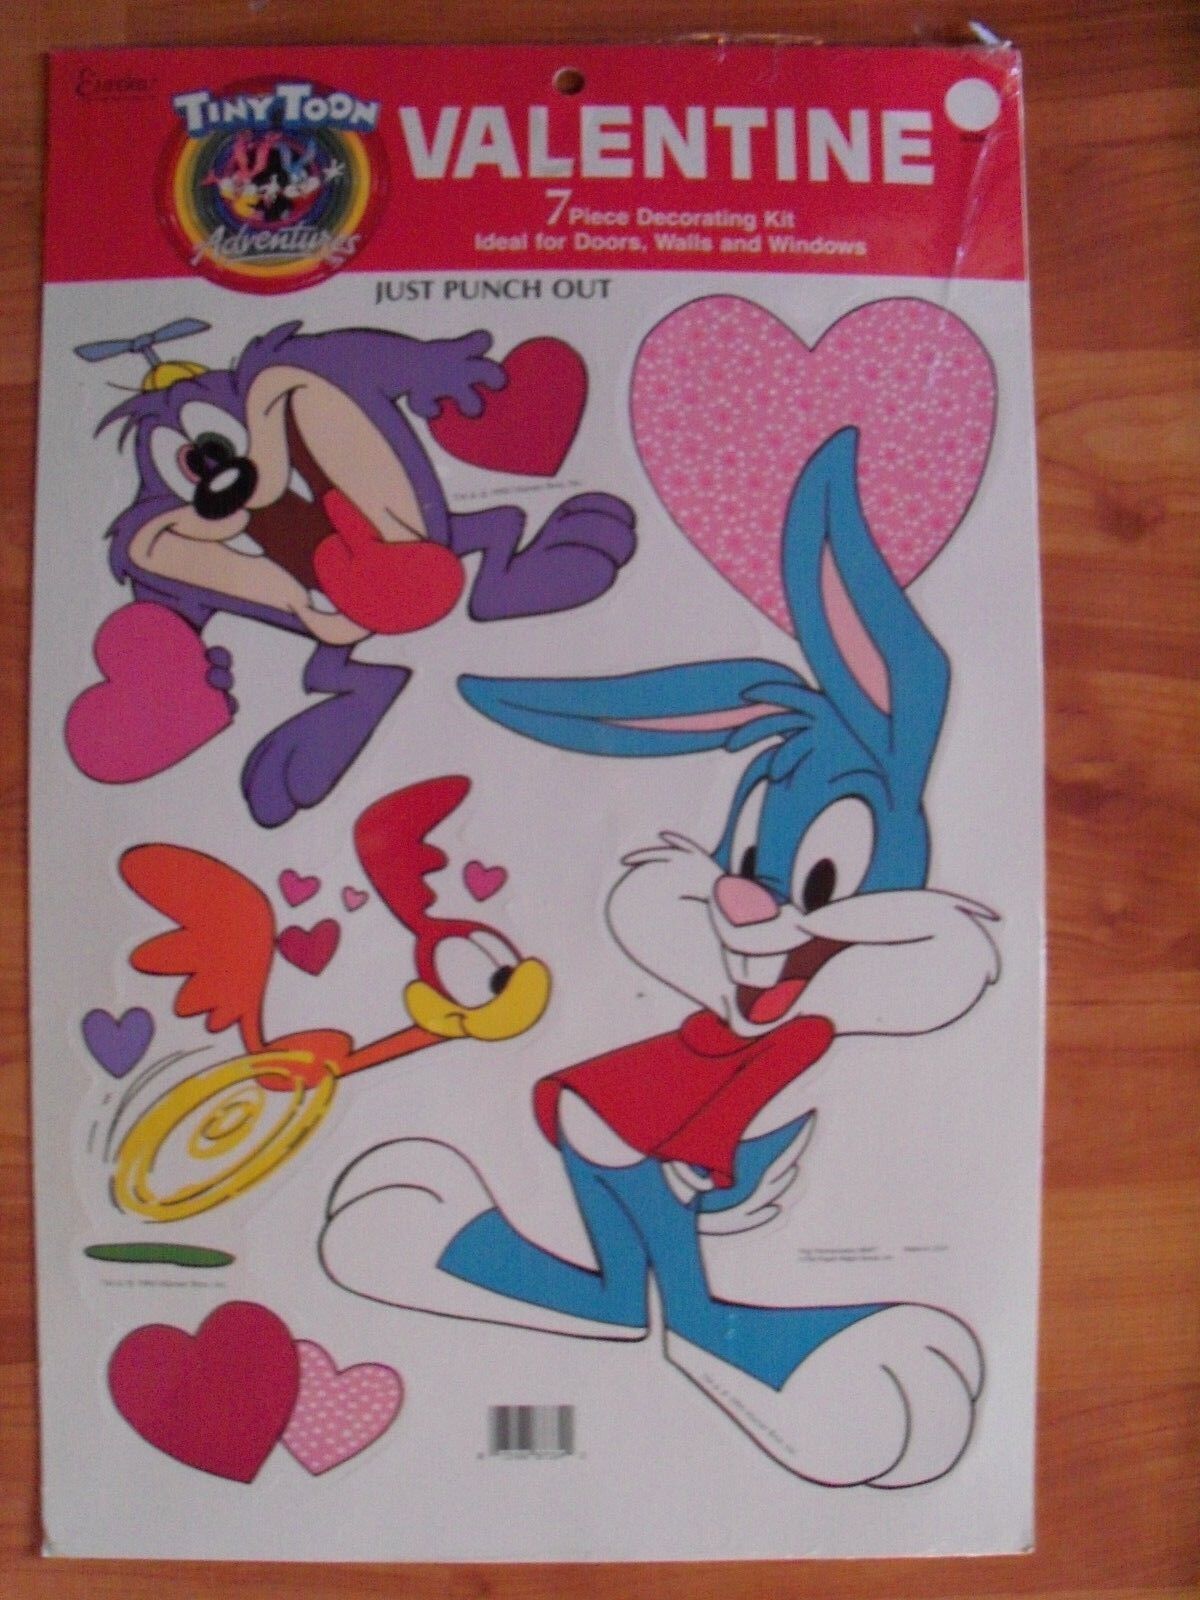 7pc Tiny Toon Adventures Punch Out Kit Valentines Decoration 1990 Eureka NOS